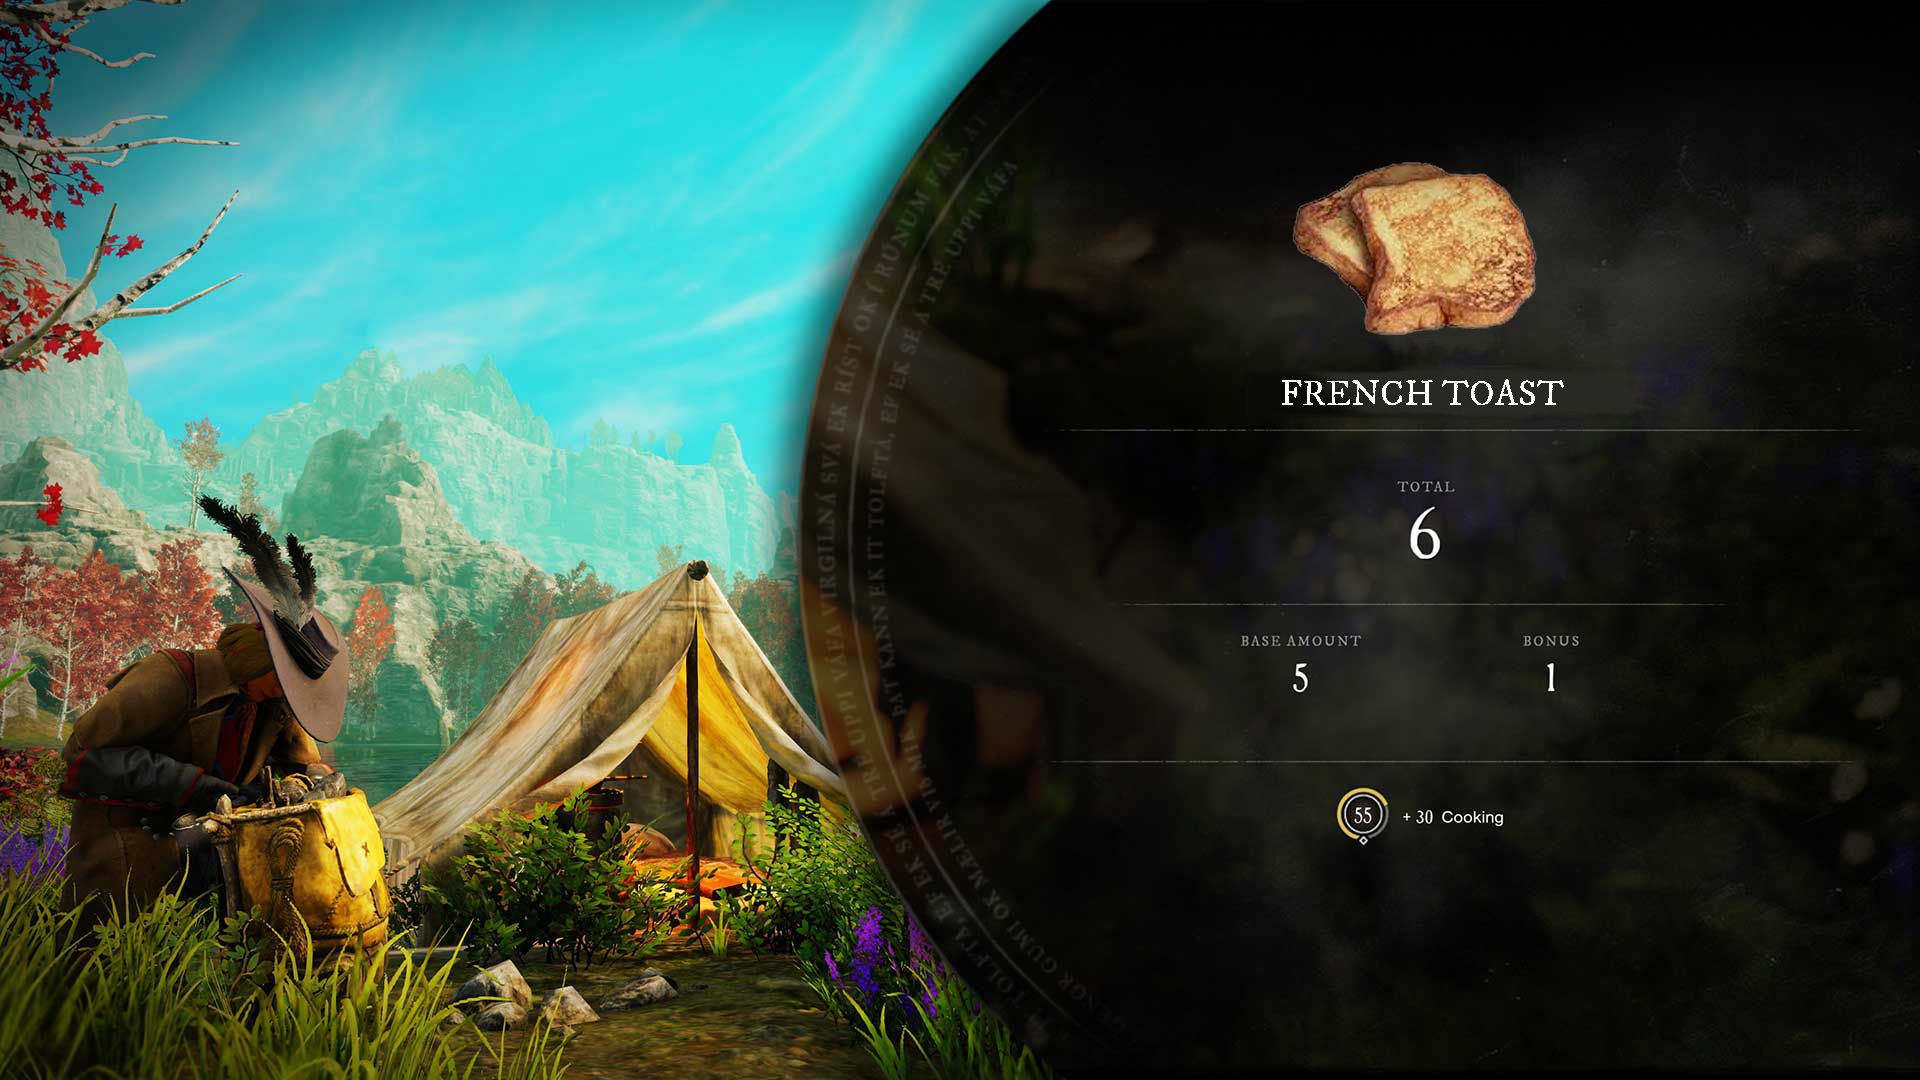 A player makes a French Toast recipe at a campsite